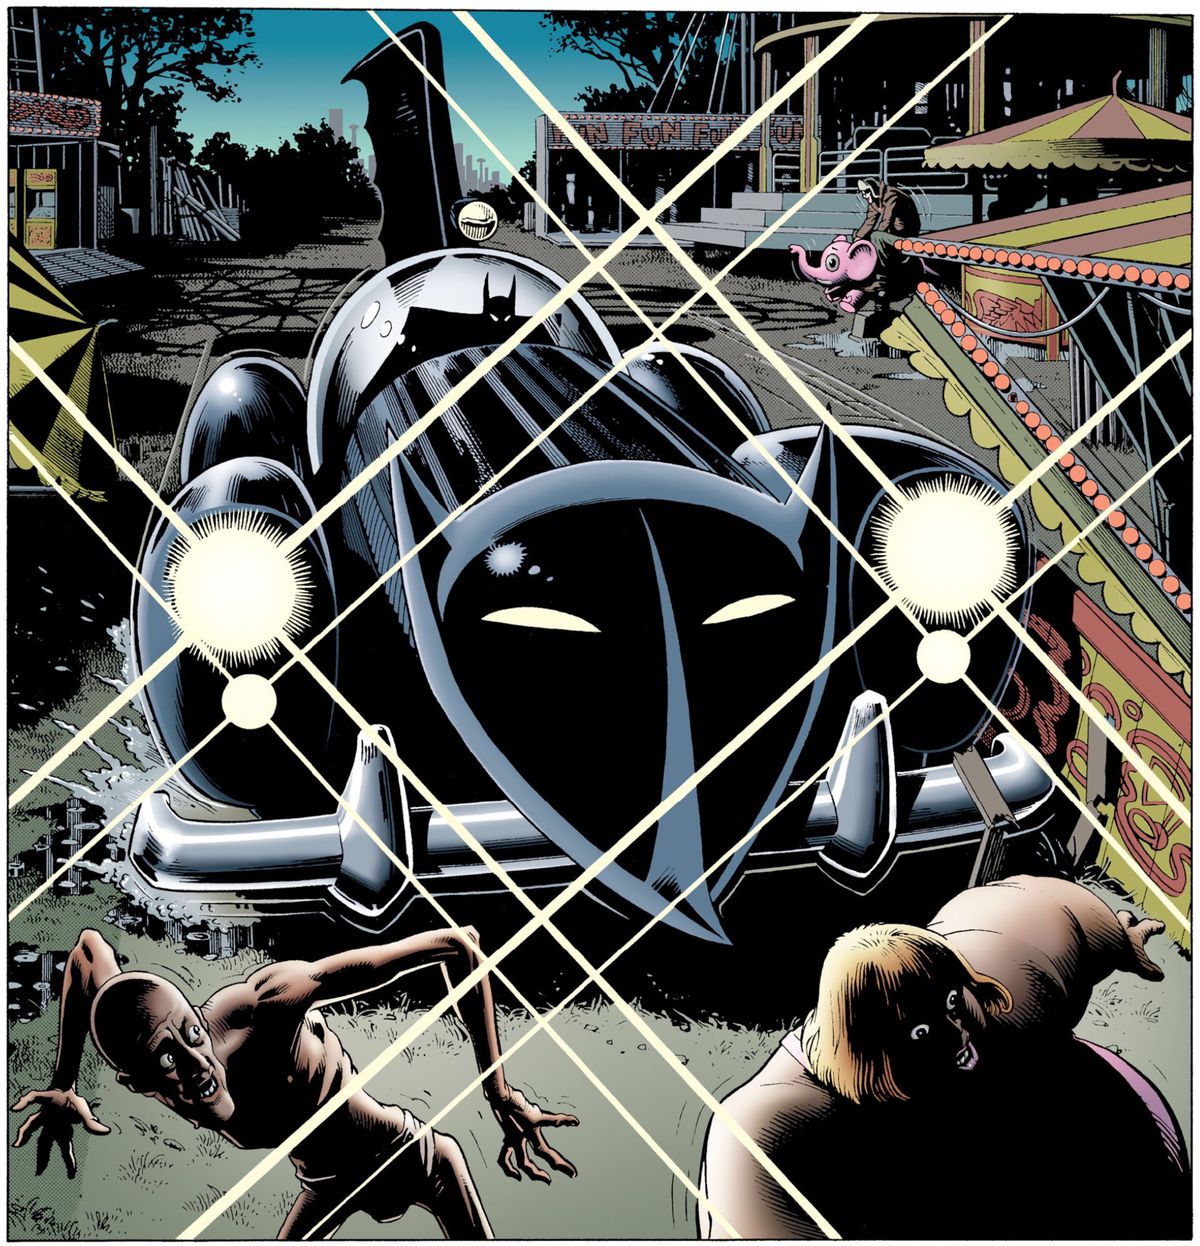 Batman pulls the Batmobile into an abandoned carnival, sending sideshow performers scattering. The car is clearly a modified mid-century roadster, with a big stylized bat-face on the front of it and a huge, scalloped vertical fin sprouting from its back. Seen in Batman: The Killing Joke, DC Comics (1988). 